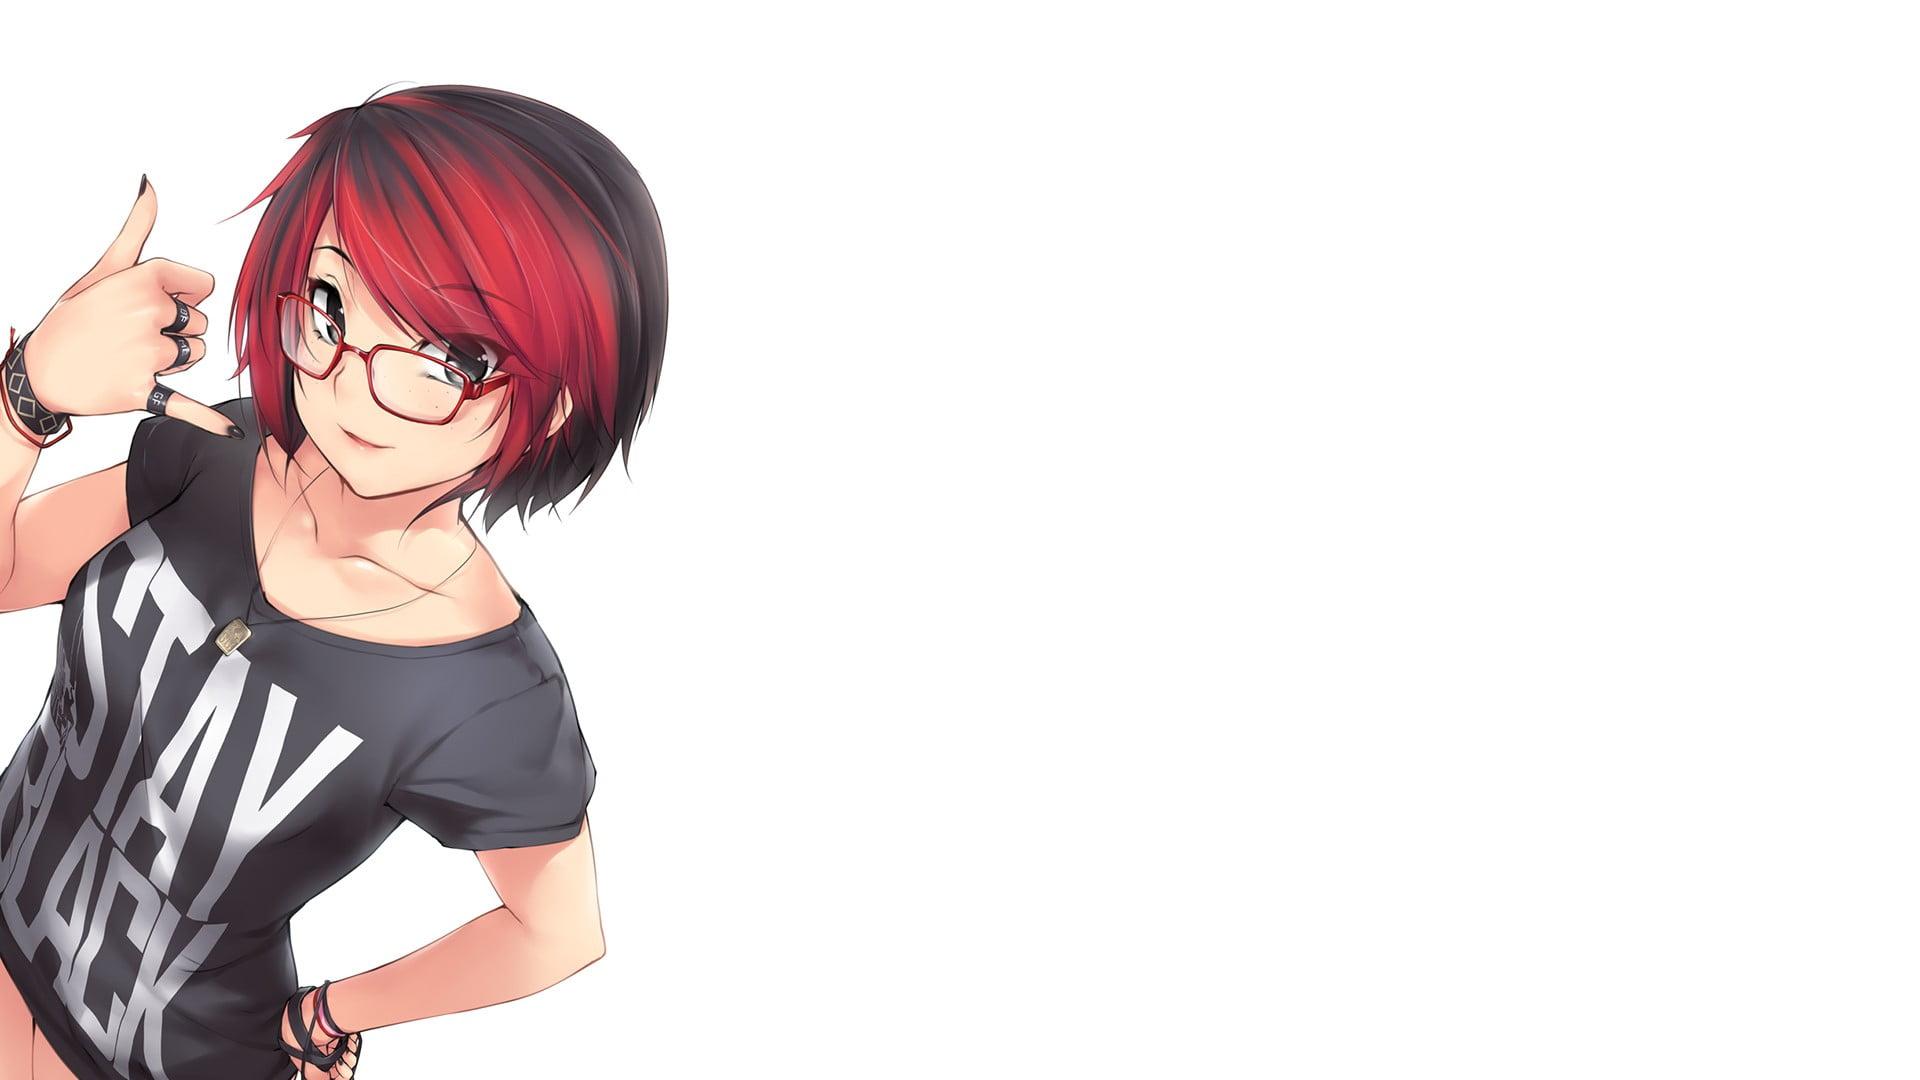 Girl anime character with red short hair HD wallpaper. Wallpaper